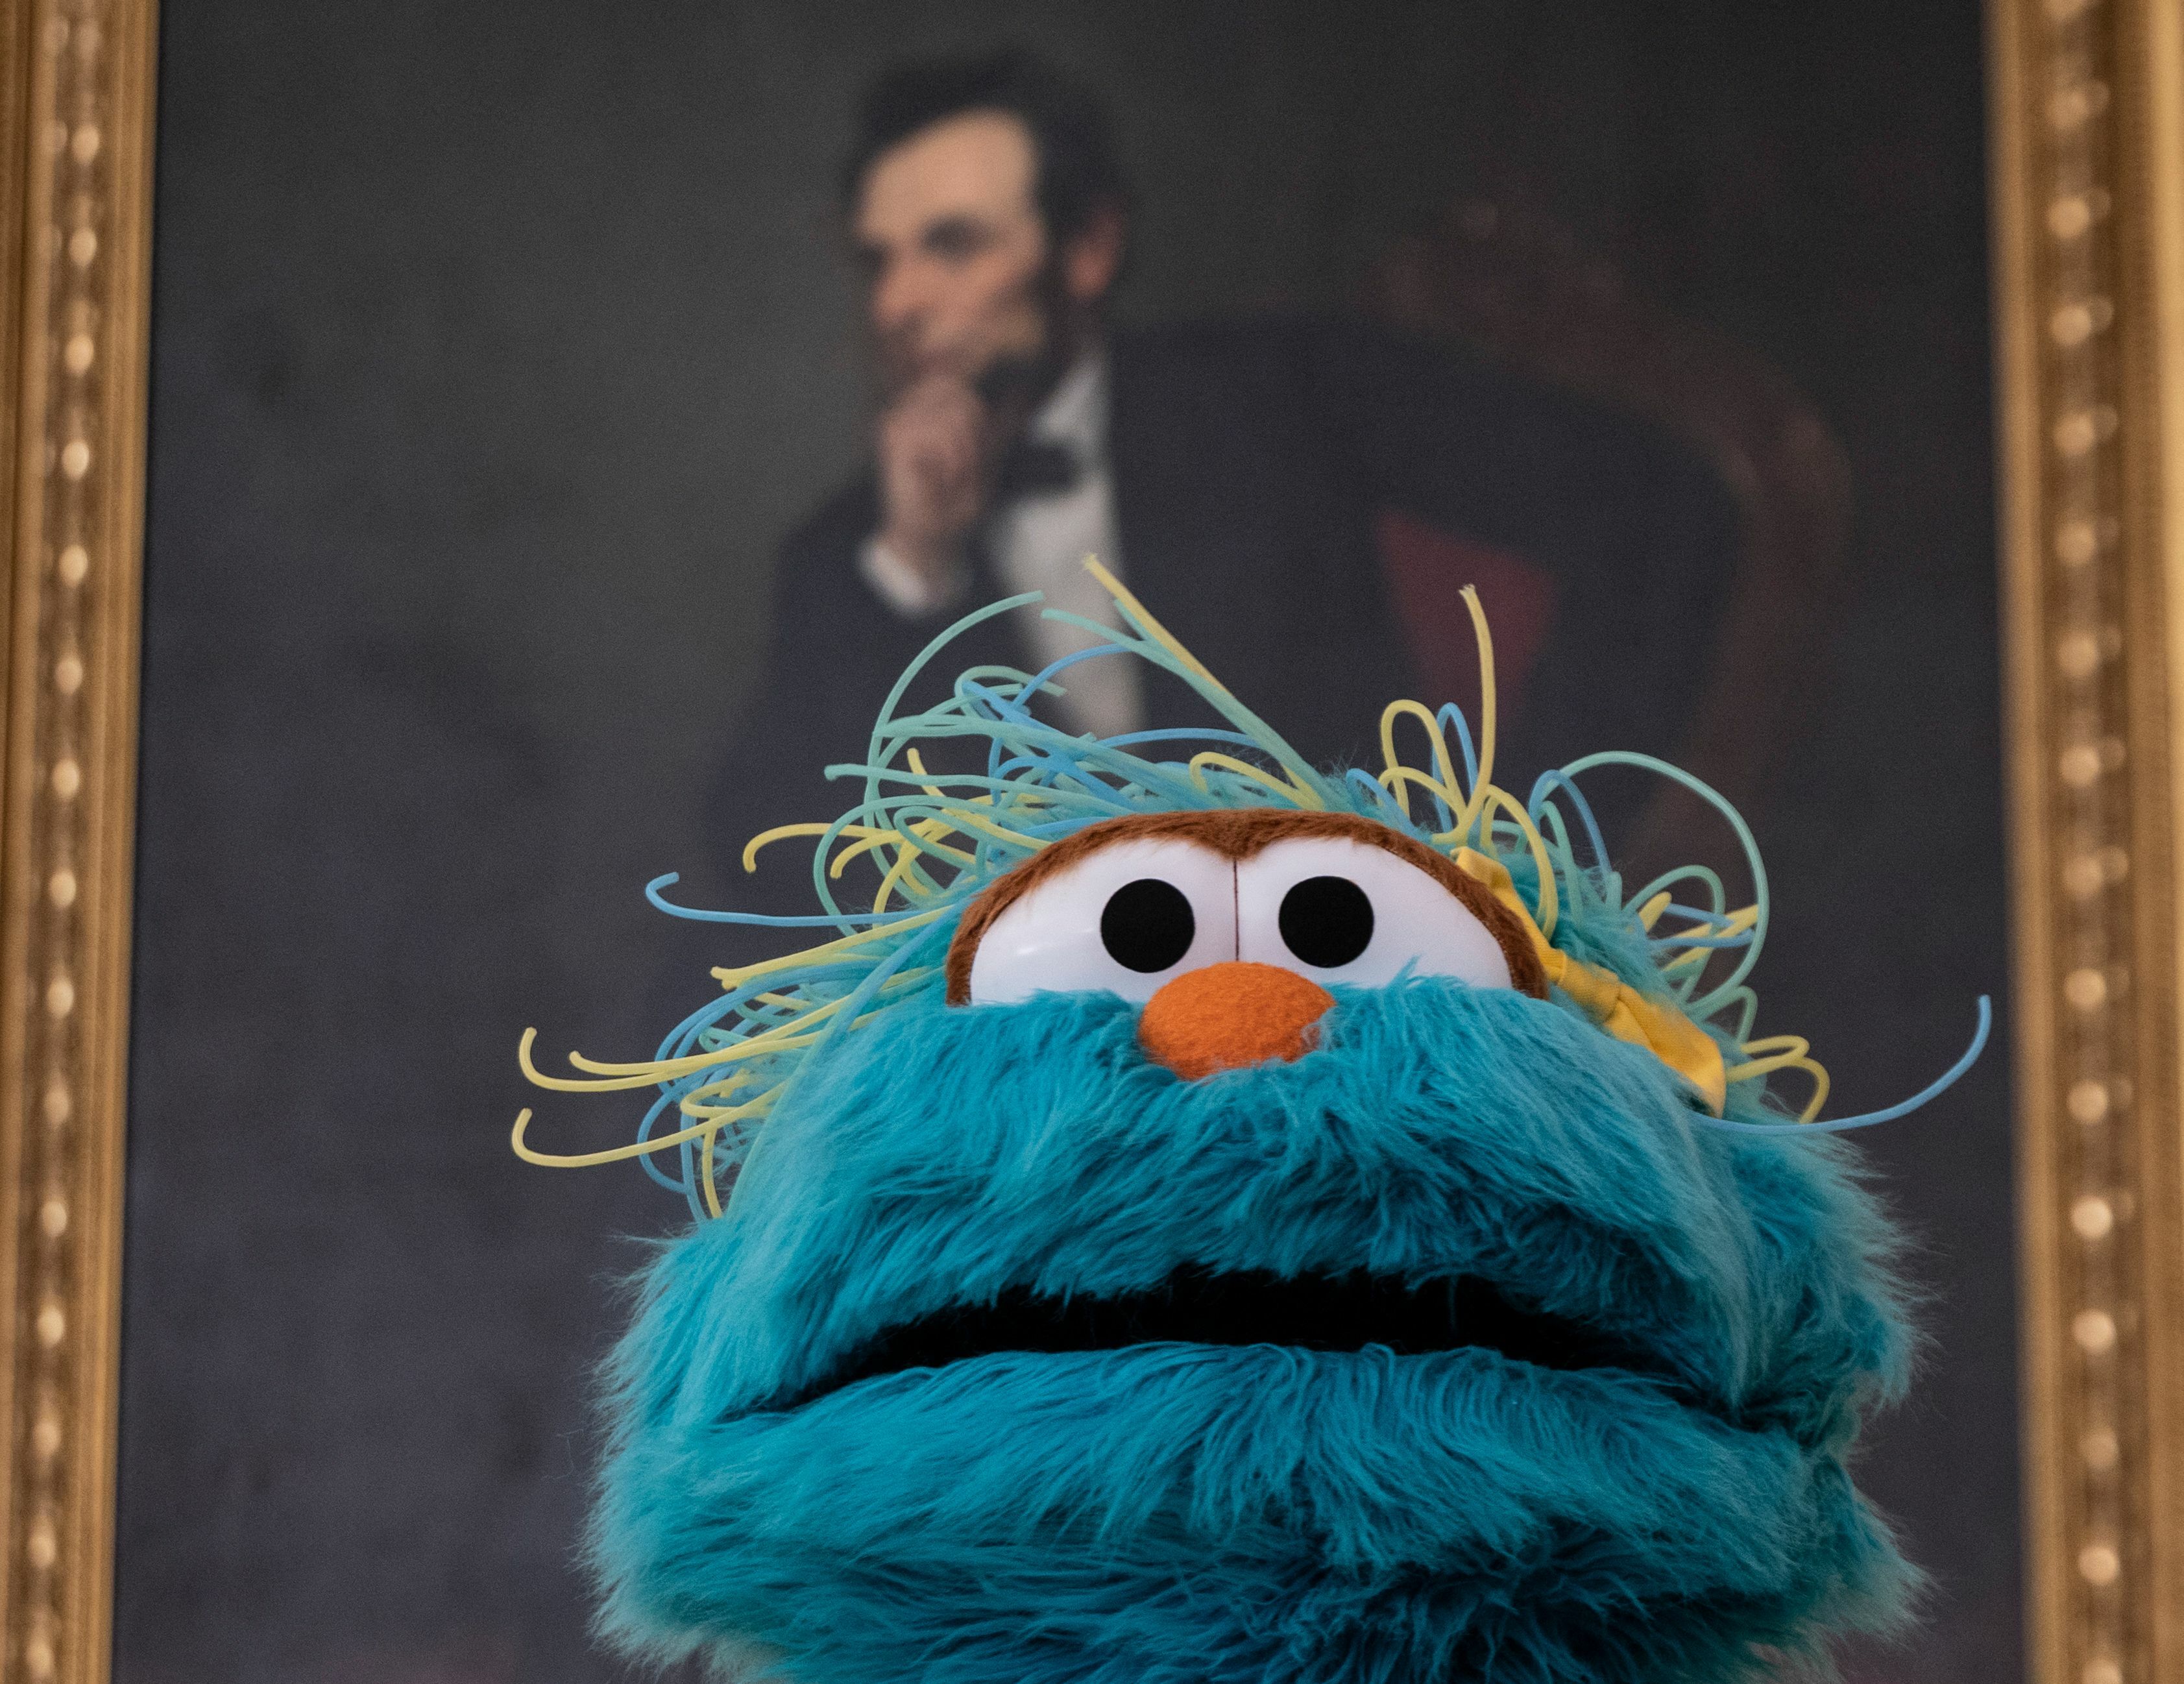 Rosita, a muppet character from Sesame Street, looks on under a painting of Abraham Lincoln during an event in the State Dining Room at the White House in Washington, DC